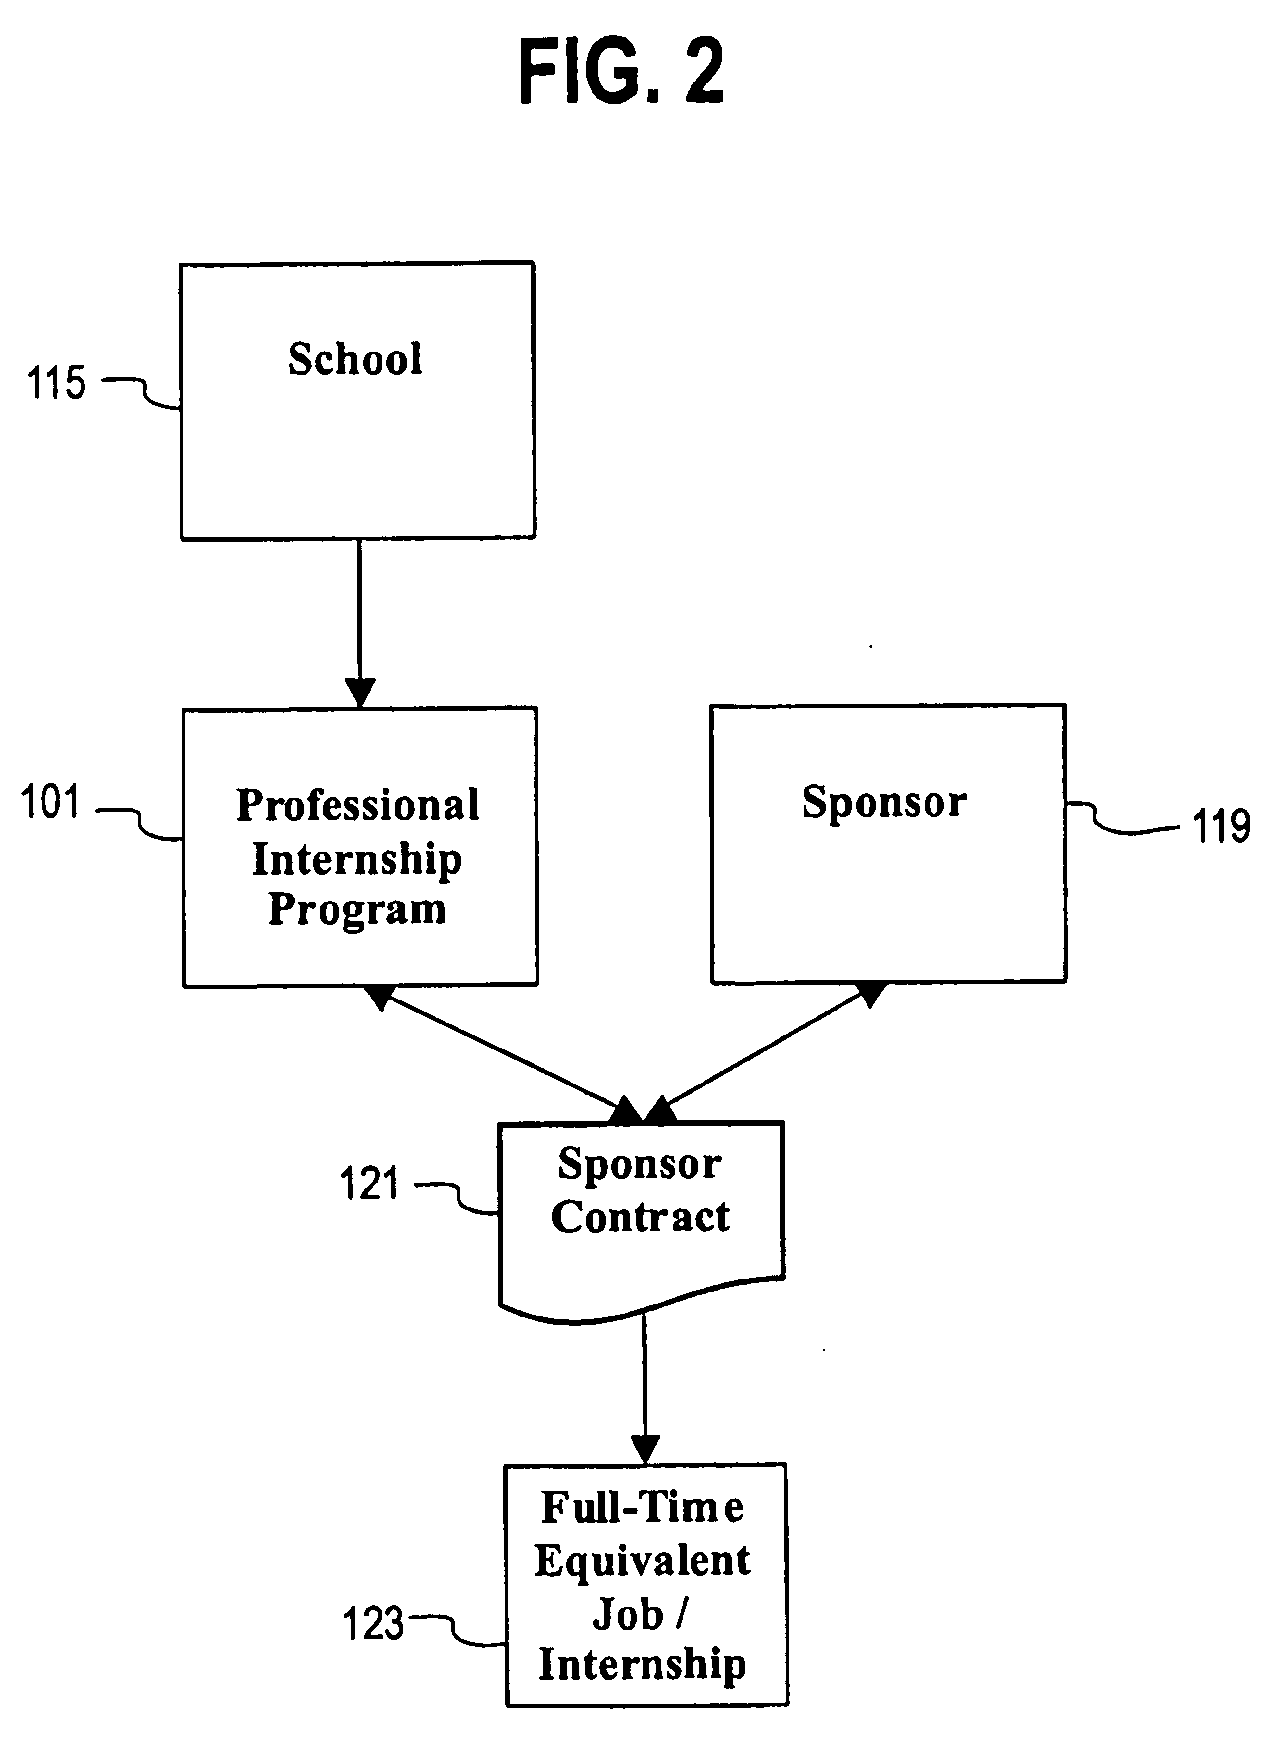 Systems and methods of financing and providing education